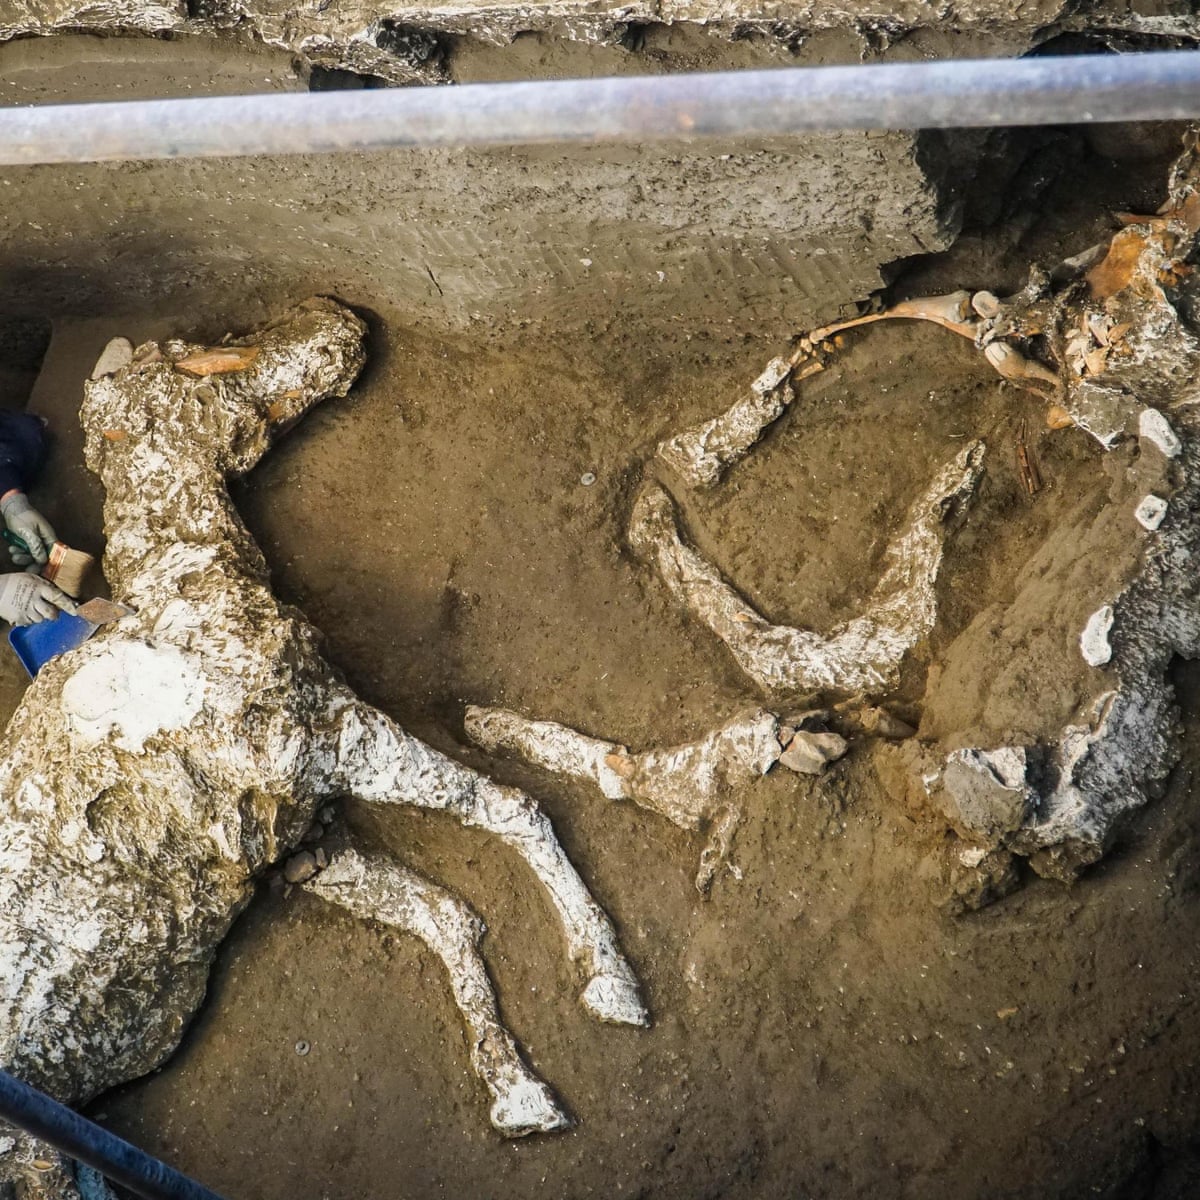 Archaeologists find remains of horses in ancient Pompeii stable |  Archaeology | The Guardian